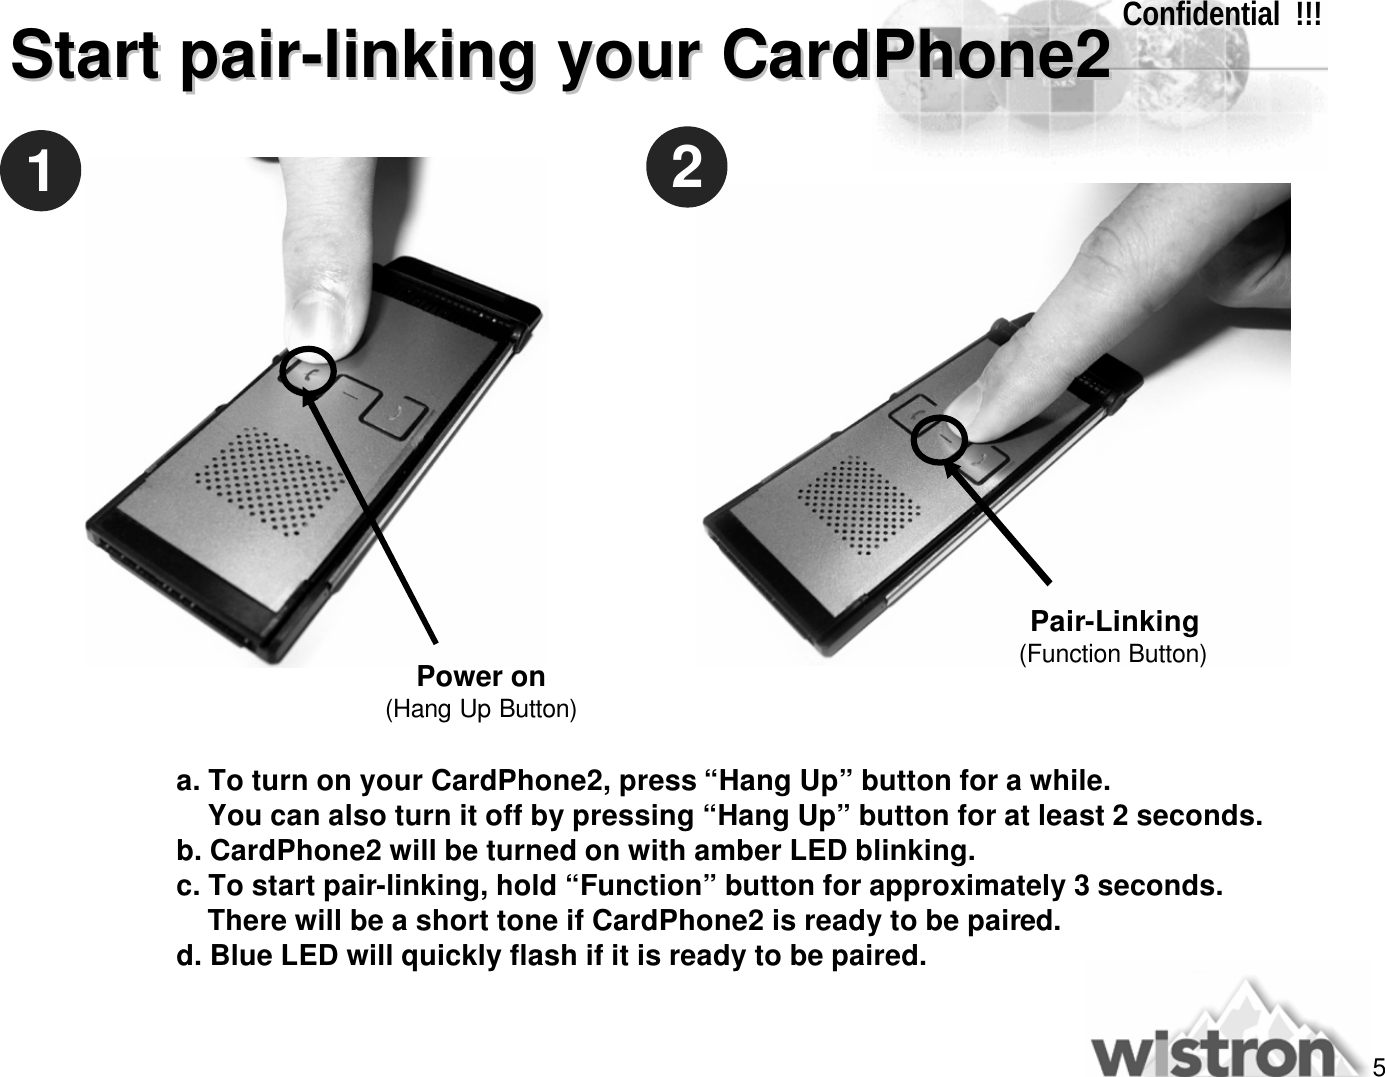 5Confidential  !!!Start pairStart pair--linking your CardPhone2linking your CardPhone2a. To turn on your CardPhone2, press “Hang Up”button for a while. You can also turn it off by pressing “Hang Up”button for at least 2 seconds.b. CardPhone2 will be turned on with amber LED blinking.c. To start pair-linking, hold “Function”button for approximately 3 seconds. There will be a short tone if CardPhone2 is ready to be paired.d. Blue LED will quickly flash if it is ready to be paired.12Power on(Hang Up Button)Pair-Linking(Function Button)